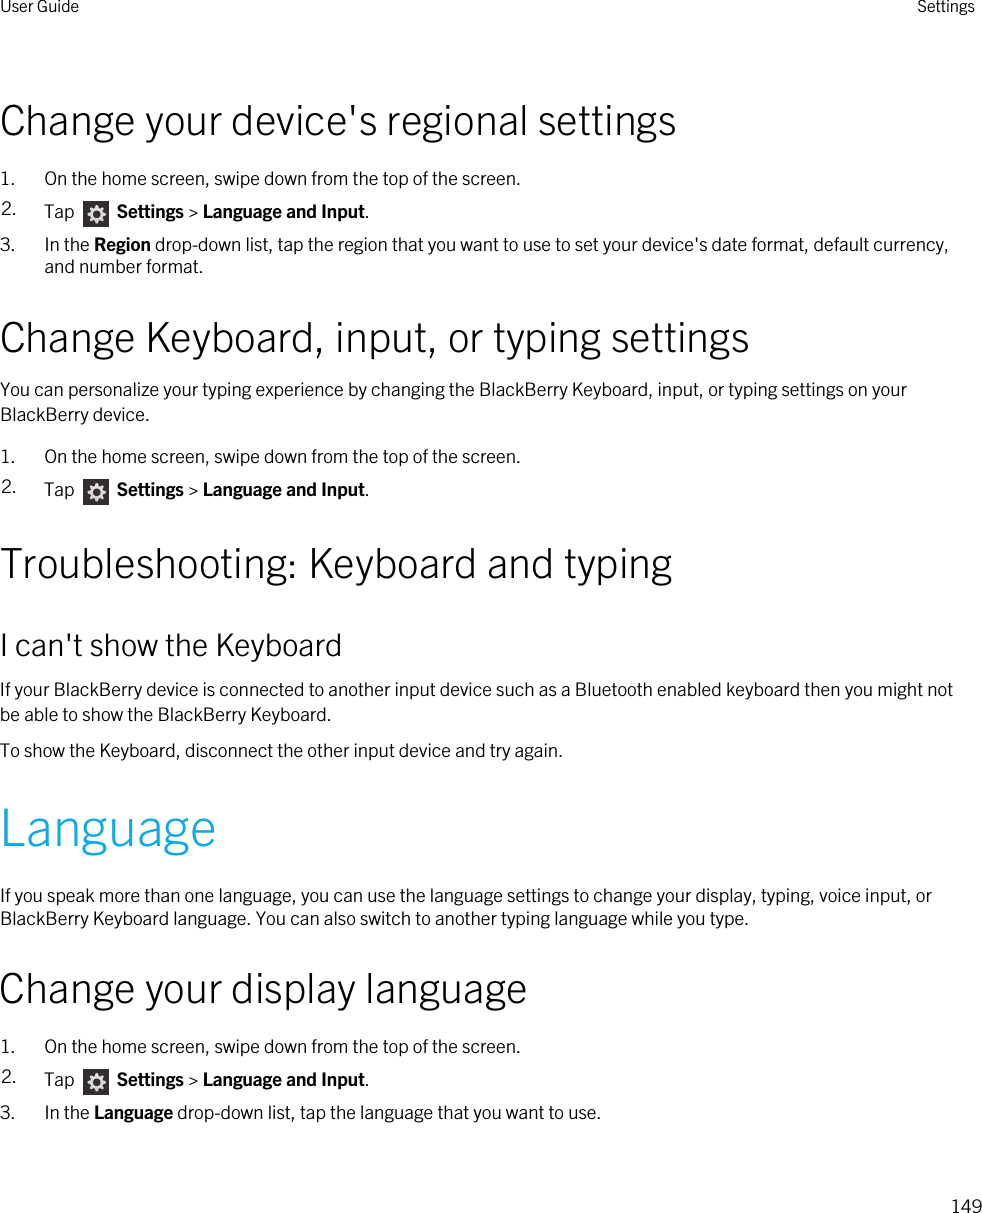 Change your device&apos;s regional settings1. On the home screen, swipe down from the top of the screen.2. Tap   Settings &gt; Language and Input.3. In the Region drop-down list, tap the region that you want to use to set your device&apos;s date format, default currency, and number format.Change Keyboard, input, or typing settingsYou can personalize your typing experience by changing the BlackBerry Keyboard, input, or typing settings on your BlackBerry device.1. On the home screen, swipe down from the top of the screen.2. Tap   Settings &gt; Language and Input. Troubleshooting: Keyboard and typingI can&apos;t show the KeyboardIf your BlackBerry device is connected to another input device such as a Bluetooth enabled keyboard then you might not be able to show the BlackBerry Keyboard.To show the Keyboard, disconnect the other input device and try again.LanguageIf you speak more than one language, you can use the language settings to change your display, typing, voice input, or BlackBerry Keyboard language. You can also switch to another typing language while you type.Change your display language1. On the home screen, swipe down from the top of the screen.2. Tap   Settings &gt; Language and Input.3. In the Language drop-down list, tap the language that you want to use.User Guide Settings149